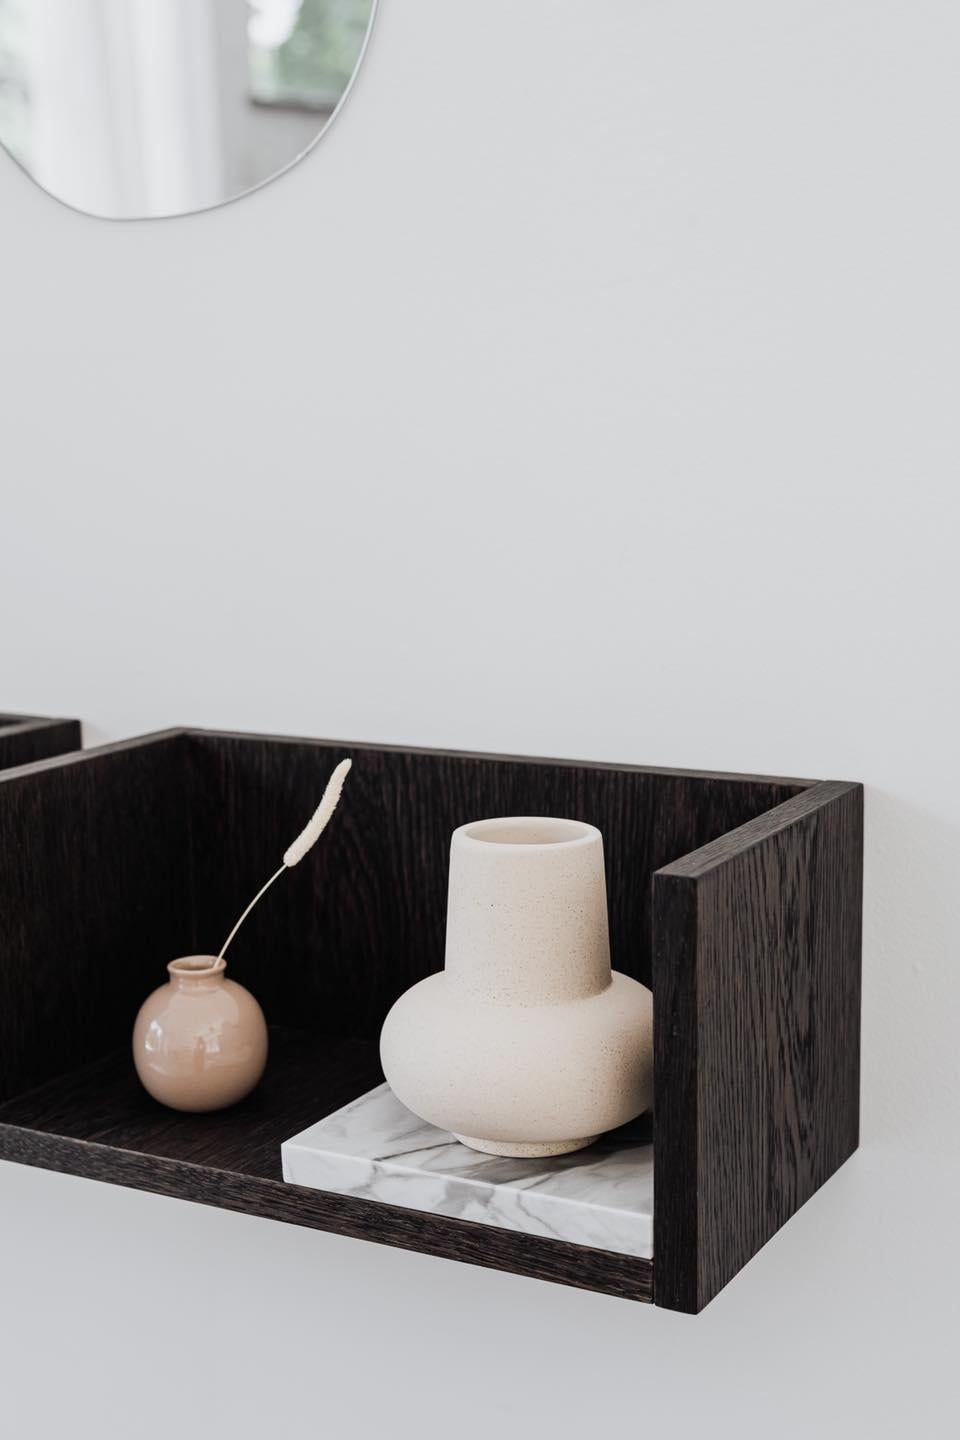 FORST SHELF is a minimalist wall shelf. The perfect spot for a book, candle or vase – all the small items you use every day or your favourite memorabilia. Every shelf has a marble tray to highlight whatever you decide to place on it. Since you can